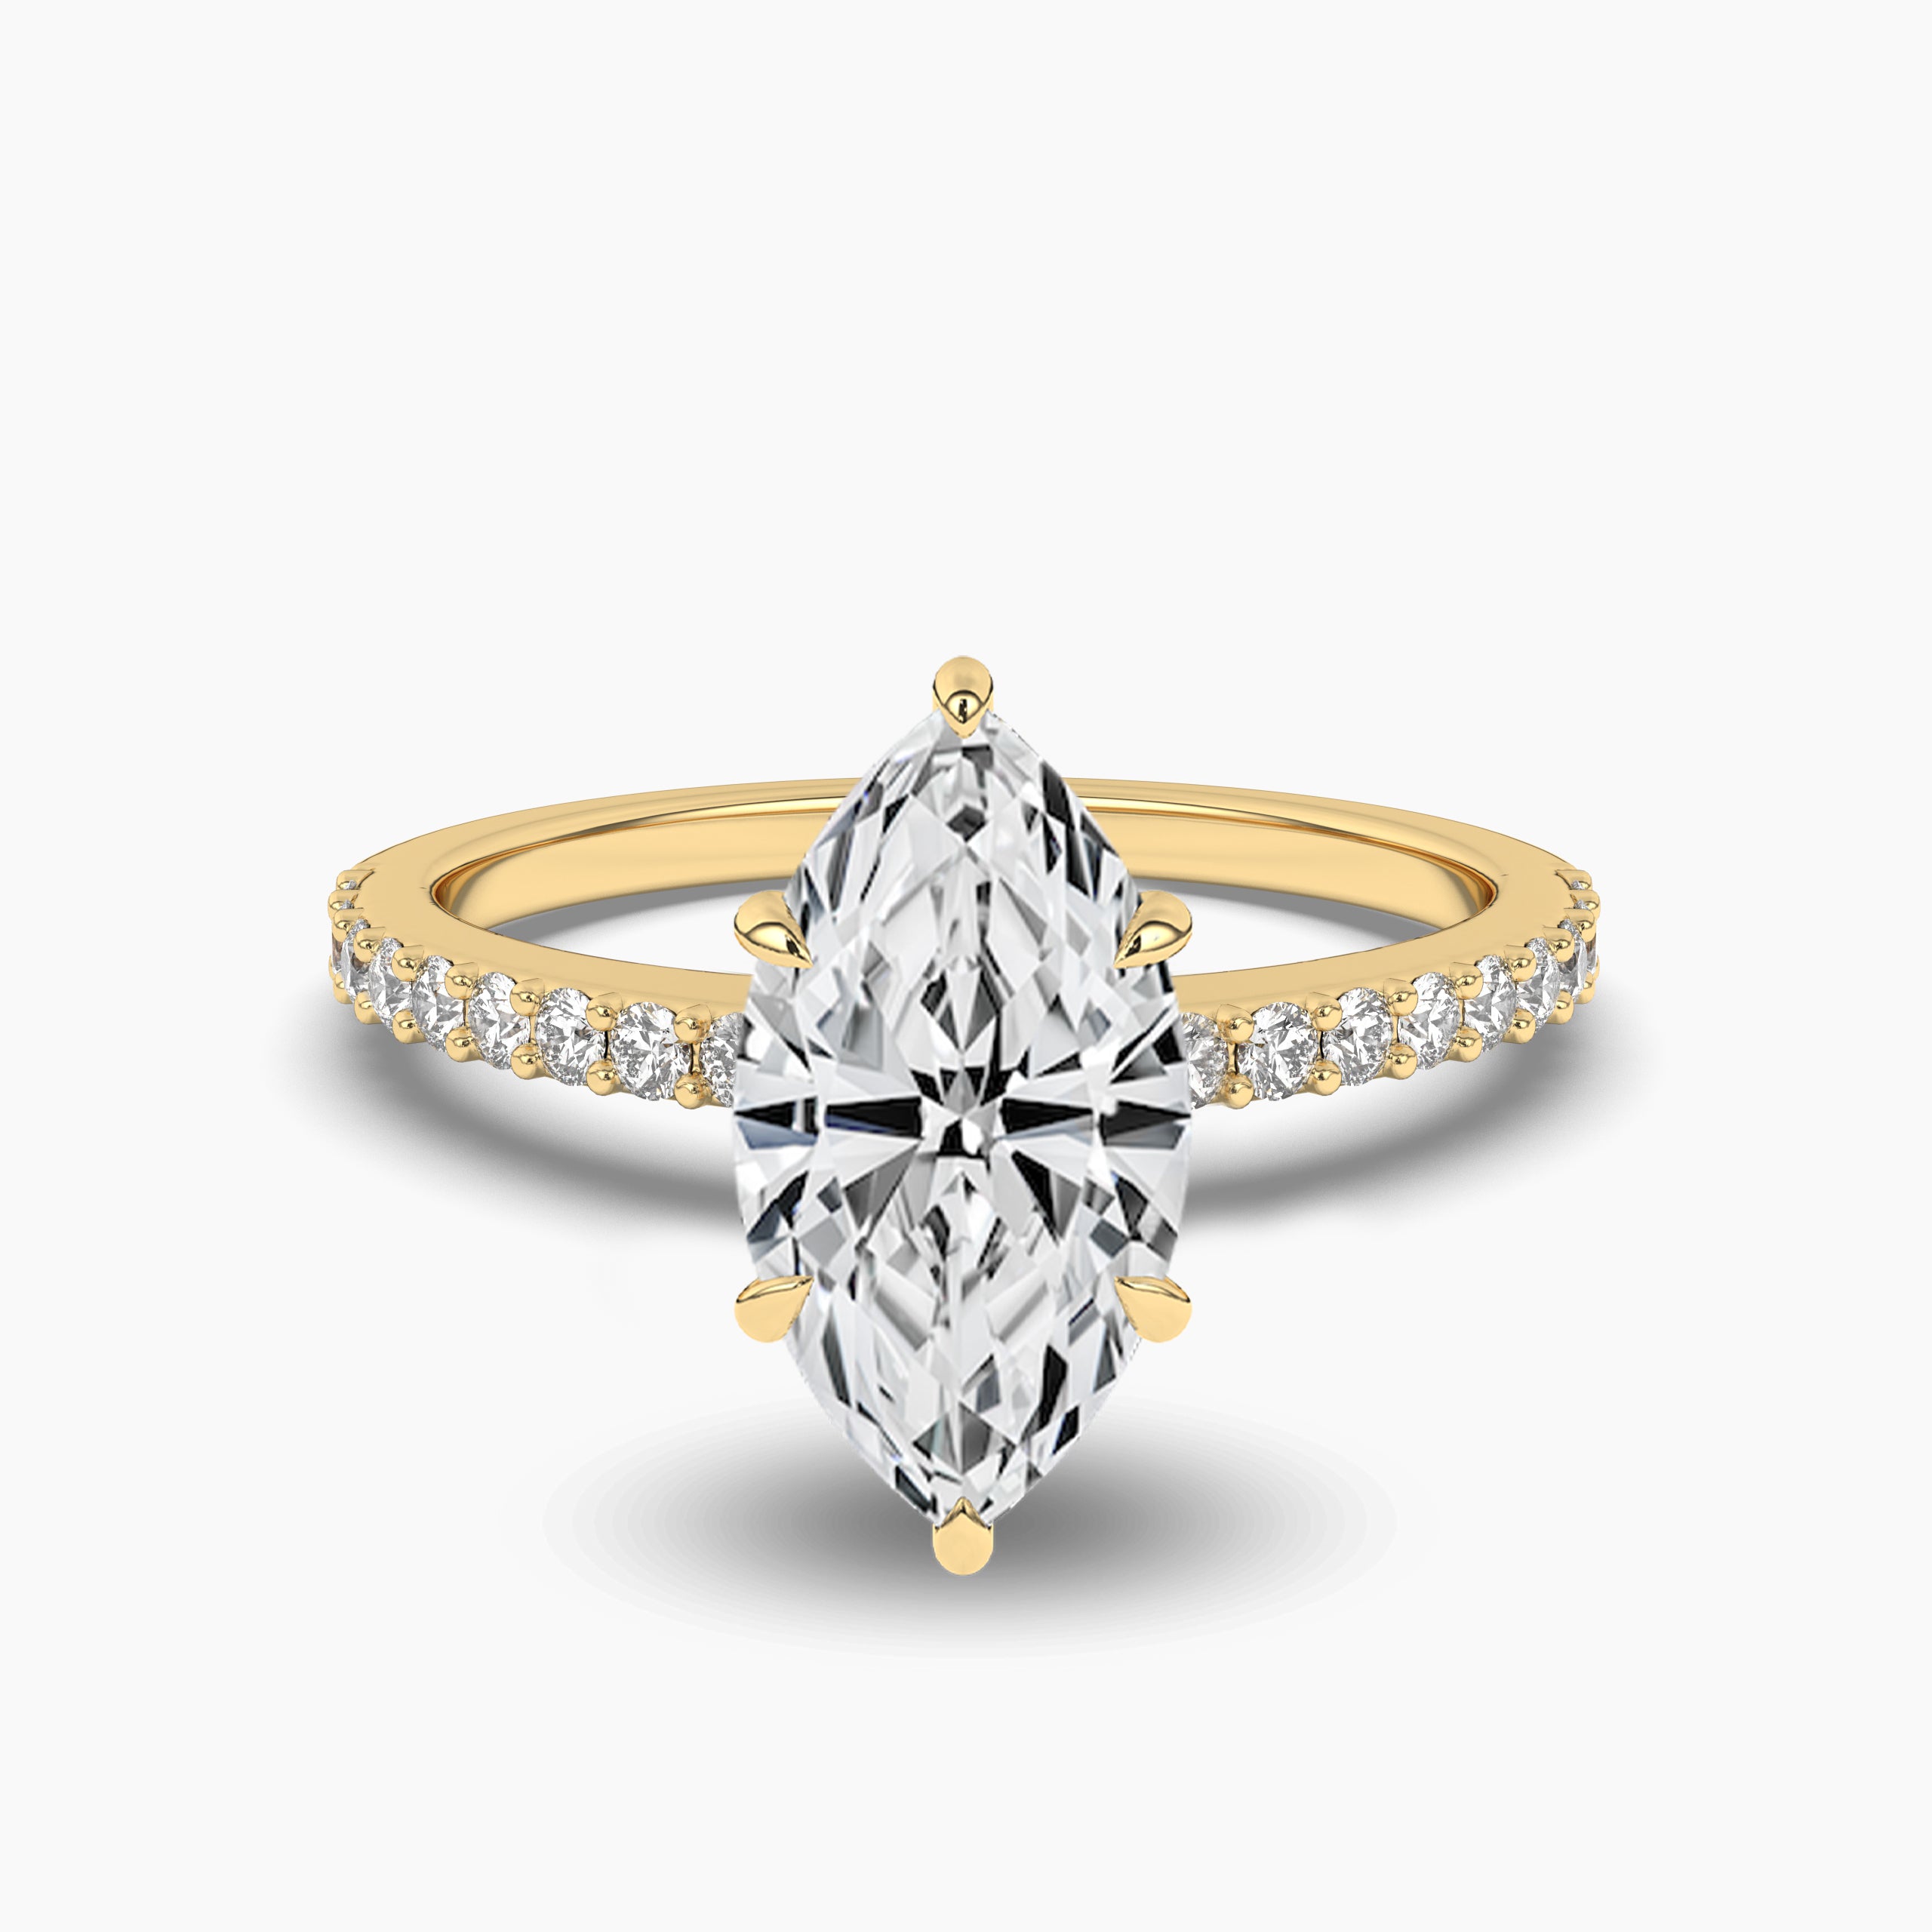 2.00carat marquise engagement ring yellow gold